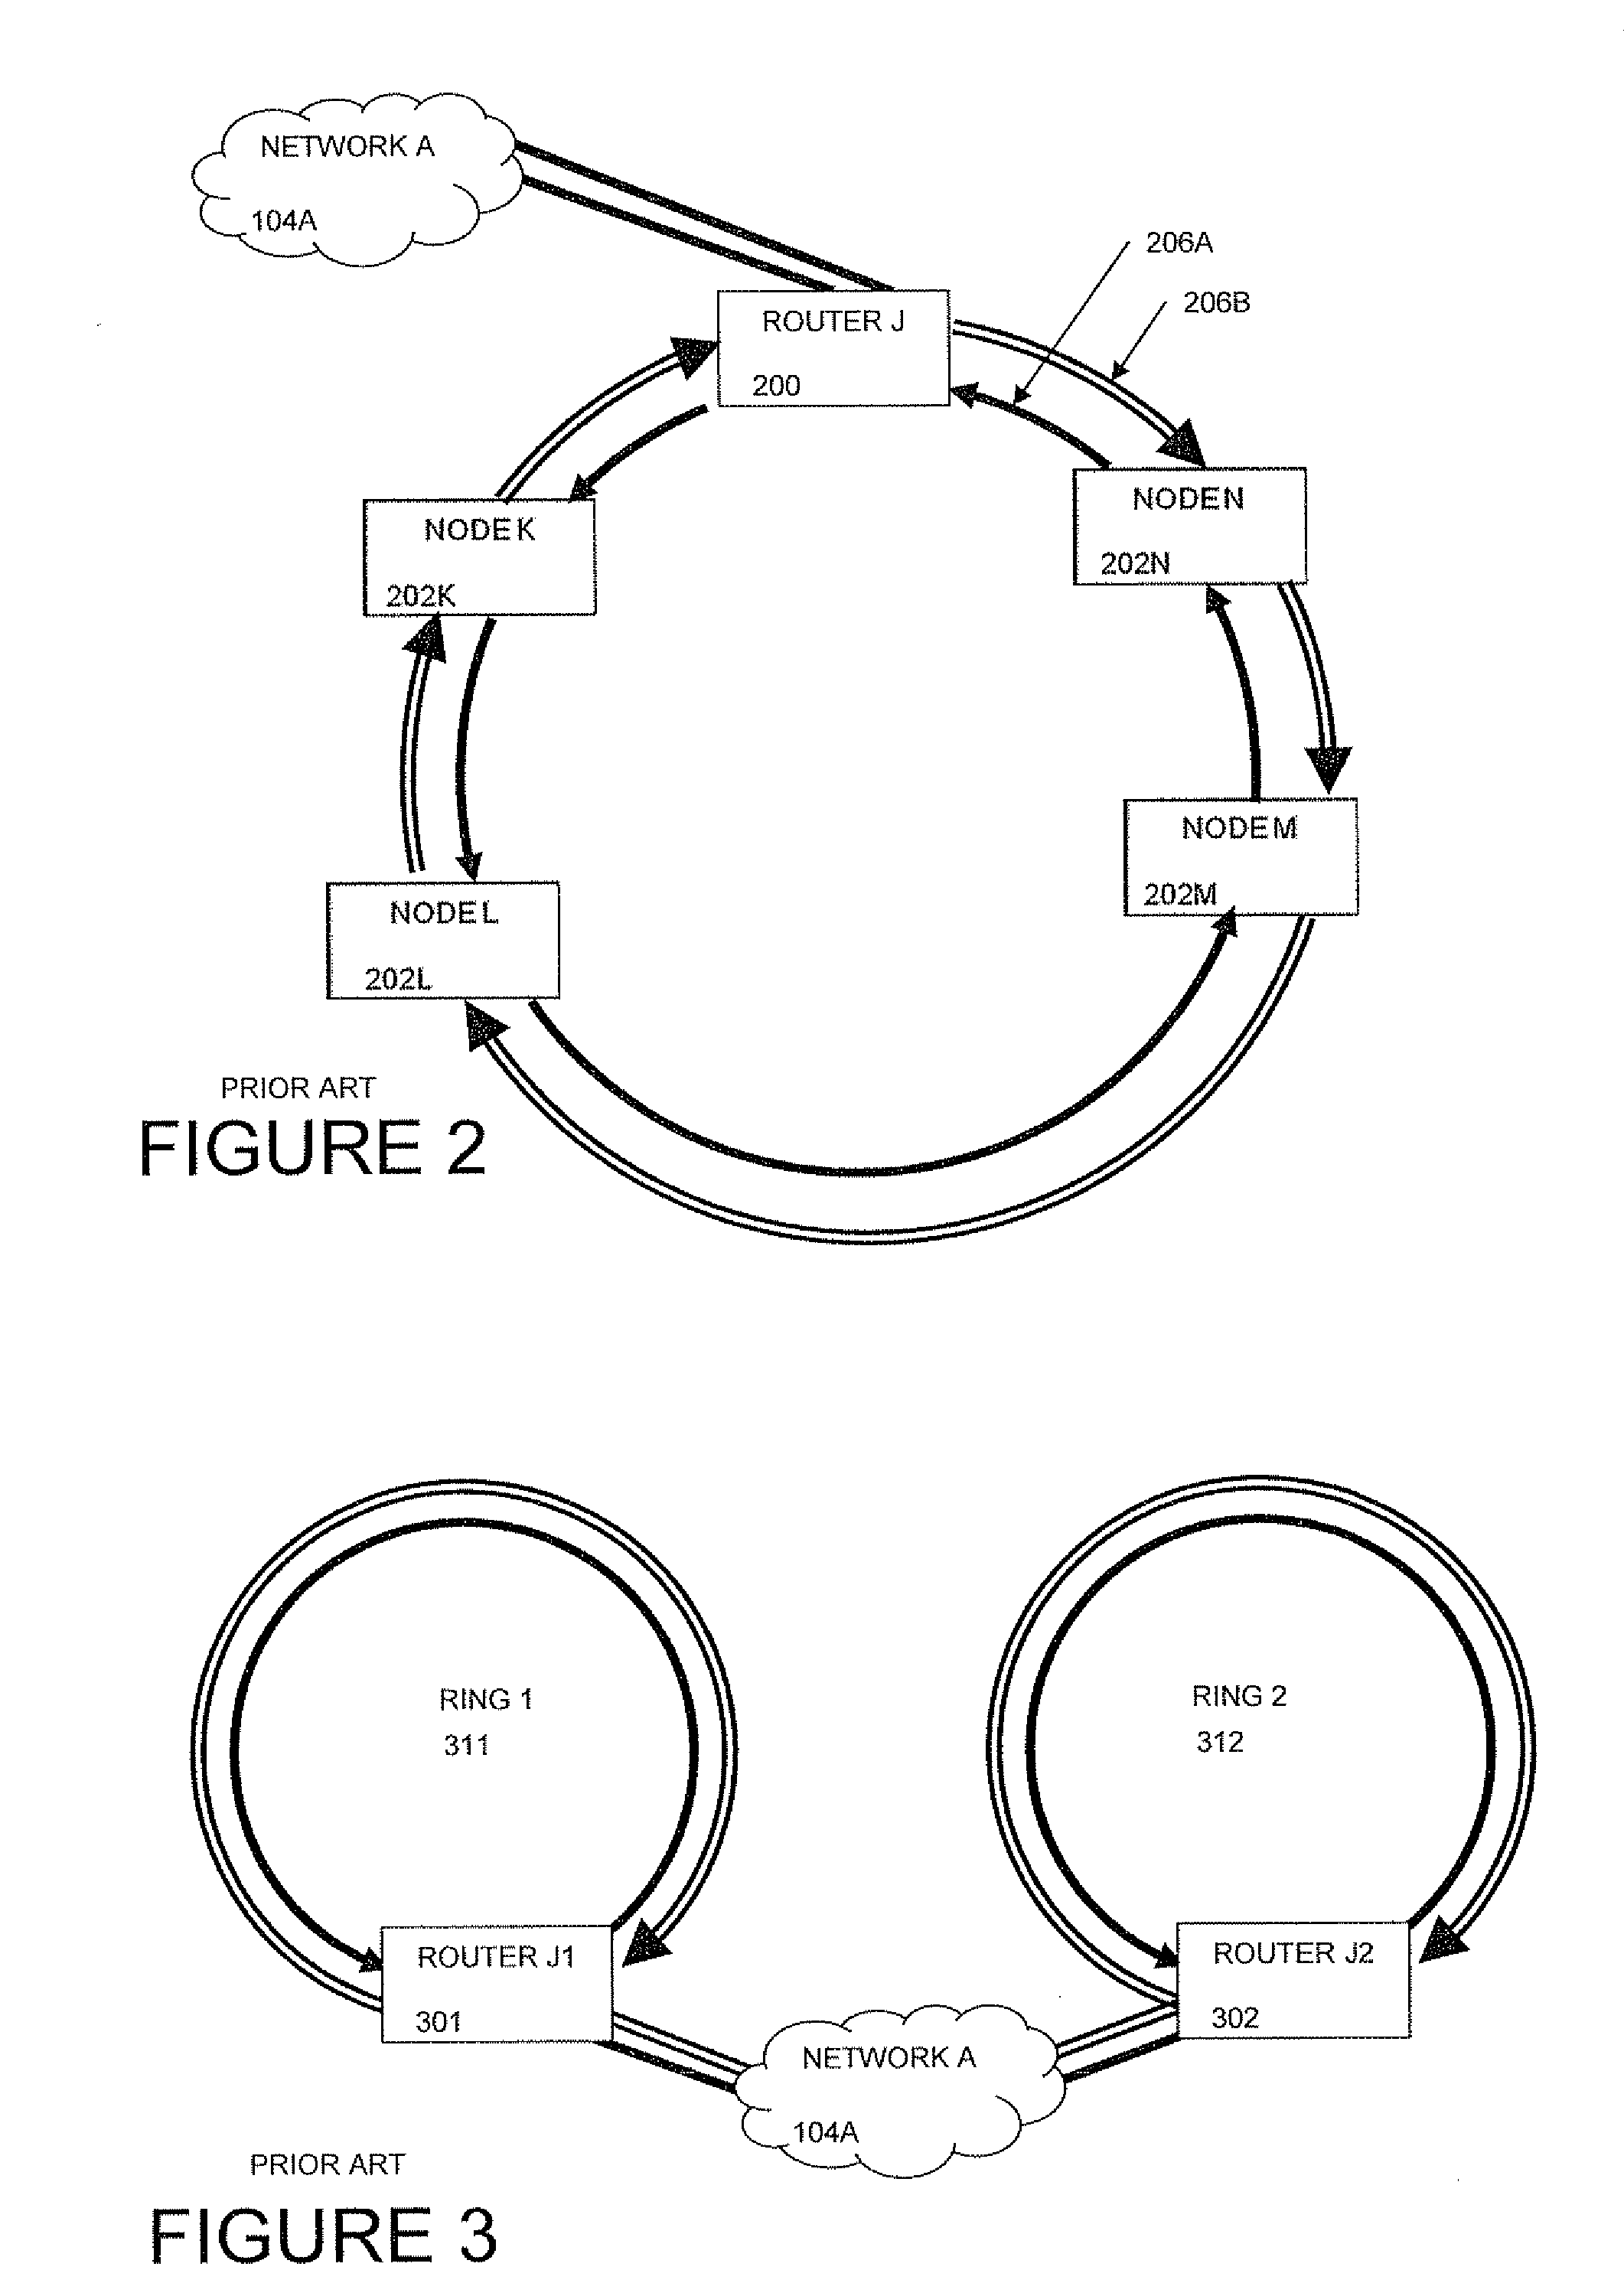 Static Ring Network for Vehicle Communications